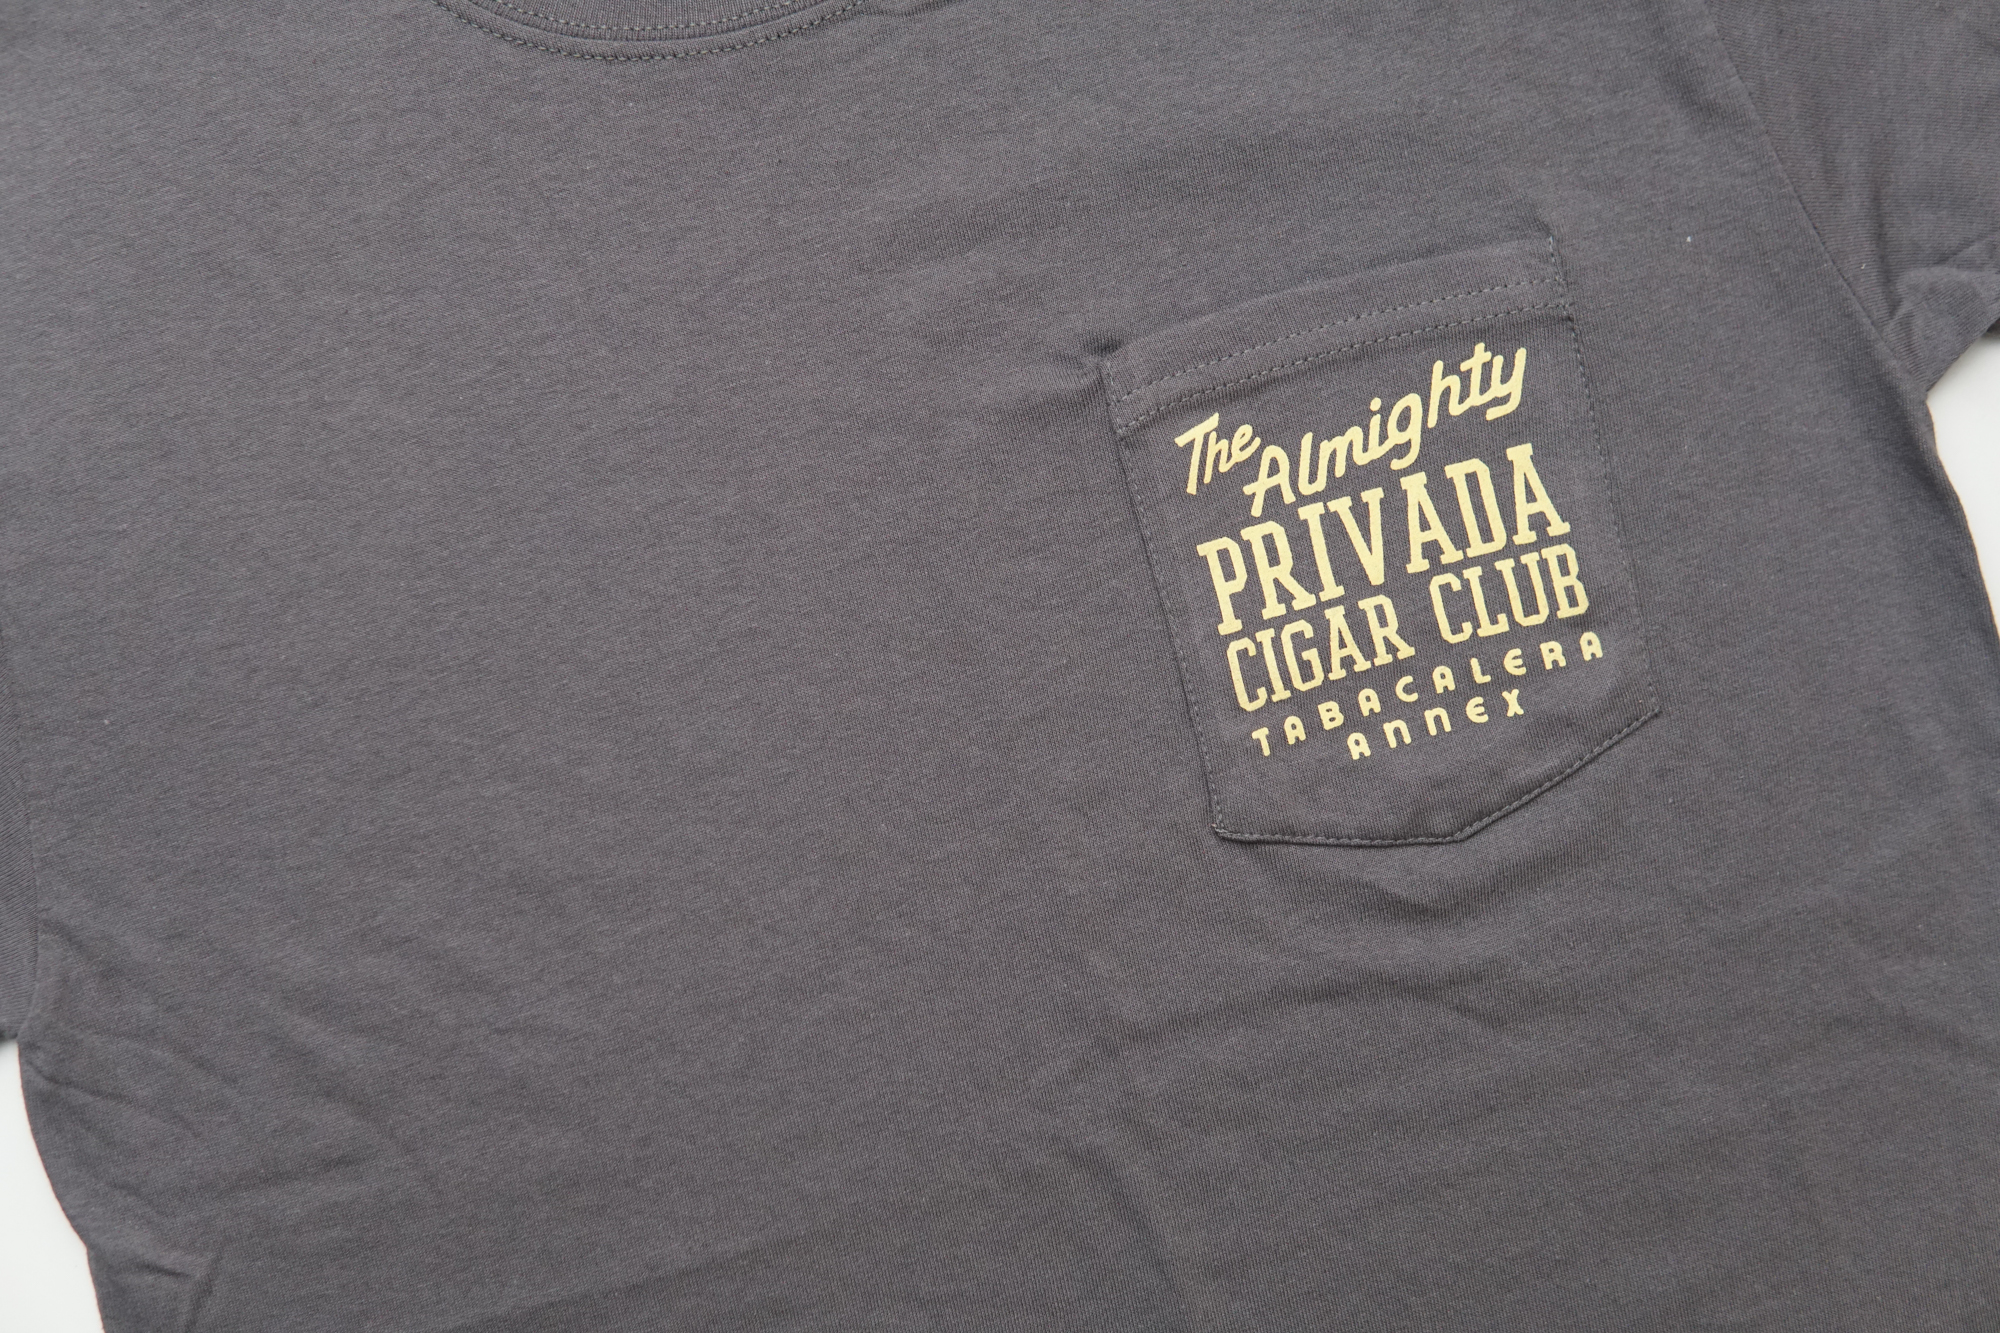 The Almighty Privada Cigar Club T-Shirt